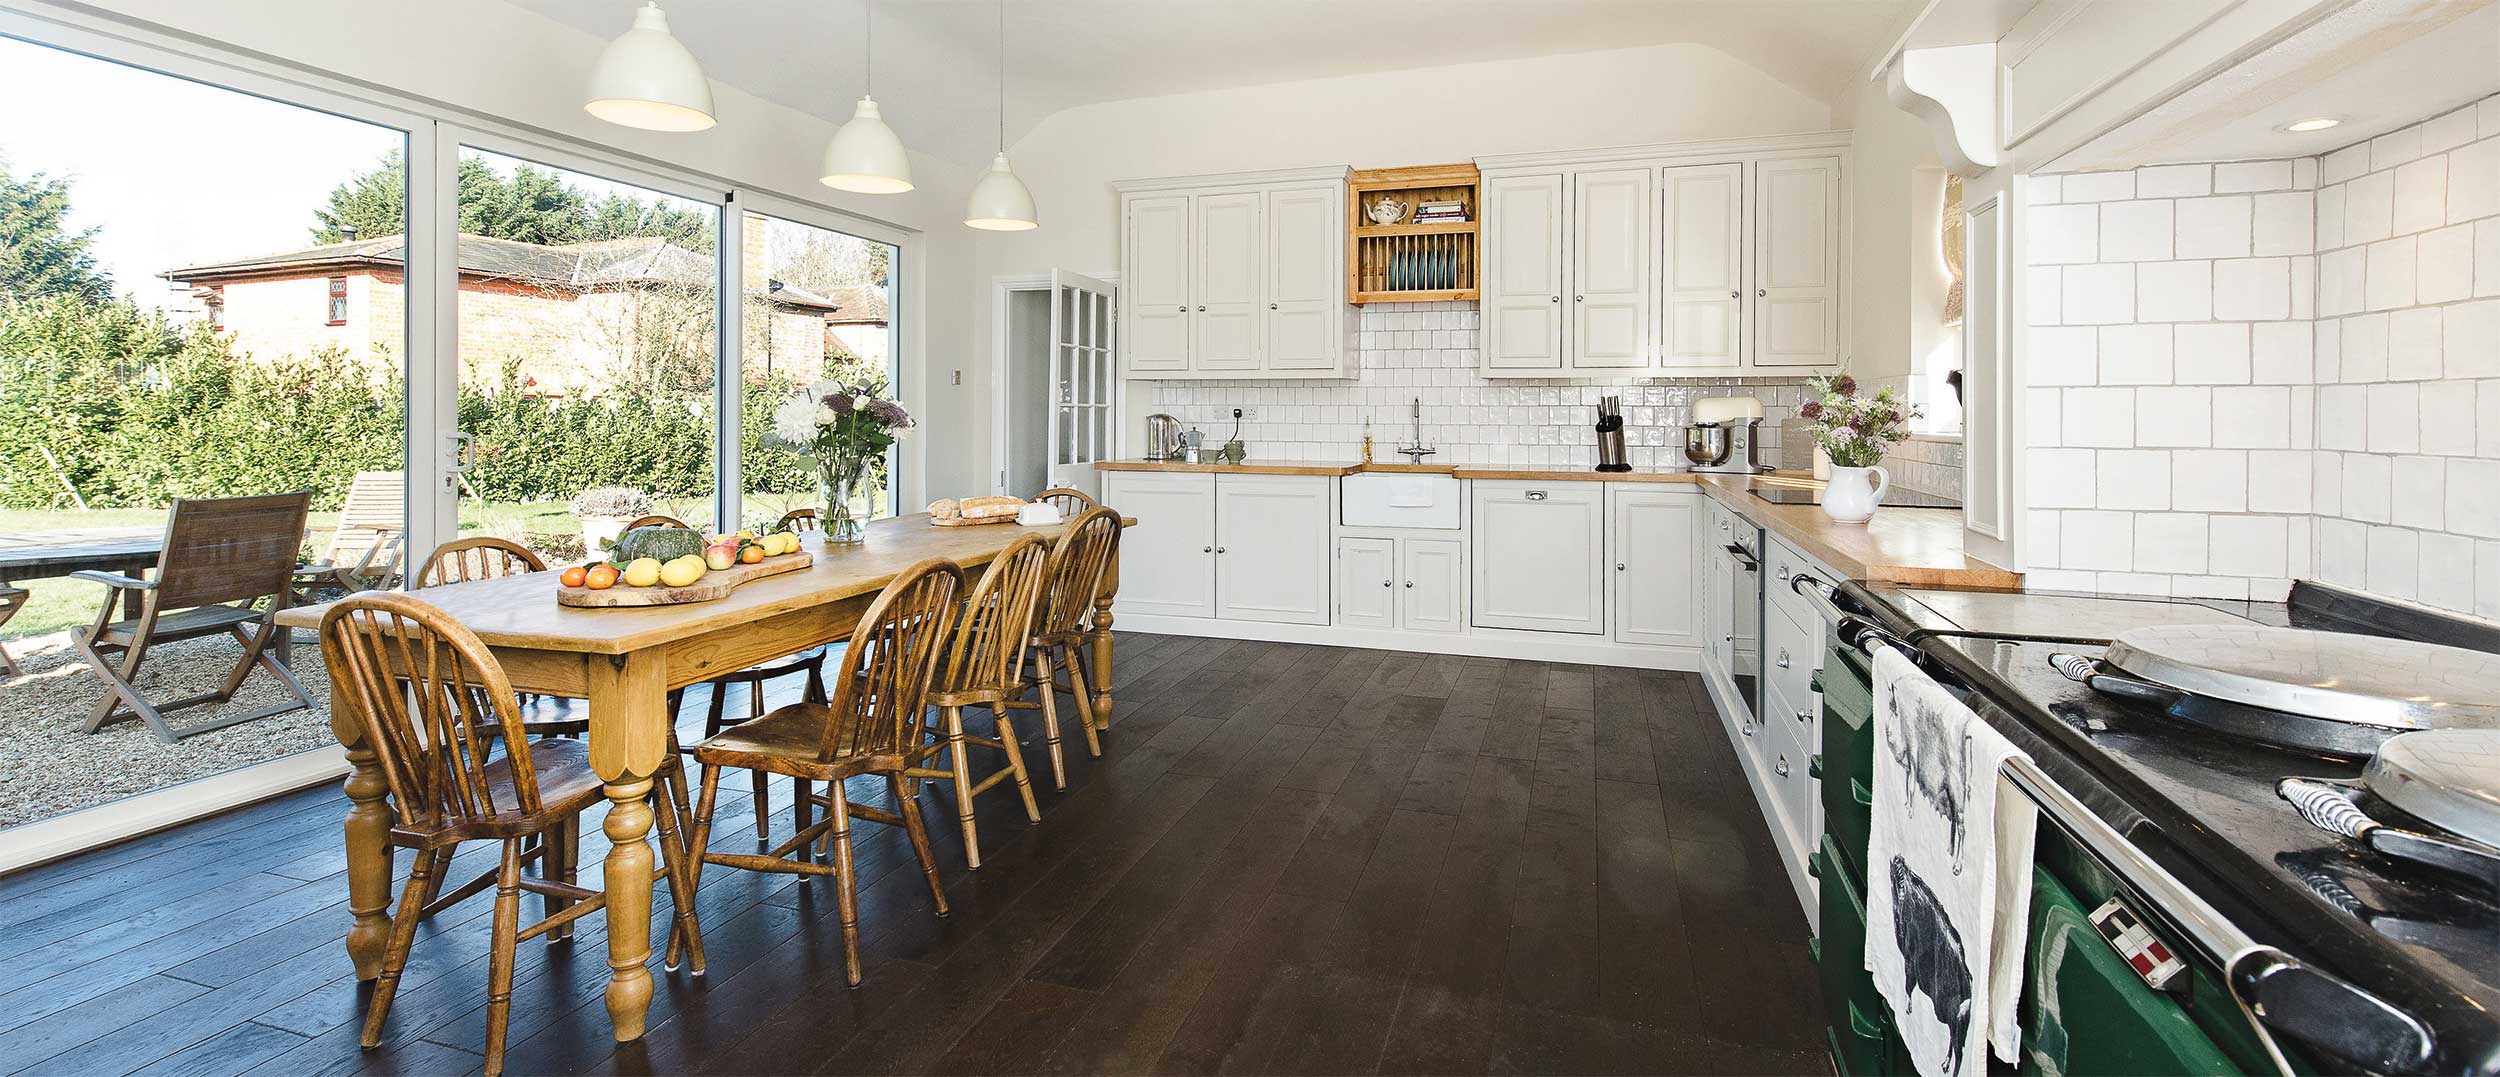 Solid wood kitchens, hand crafted and designed with you to suit your needs